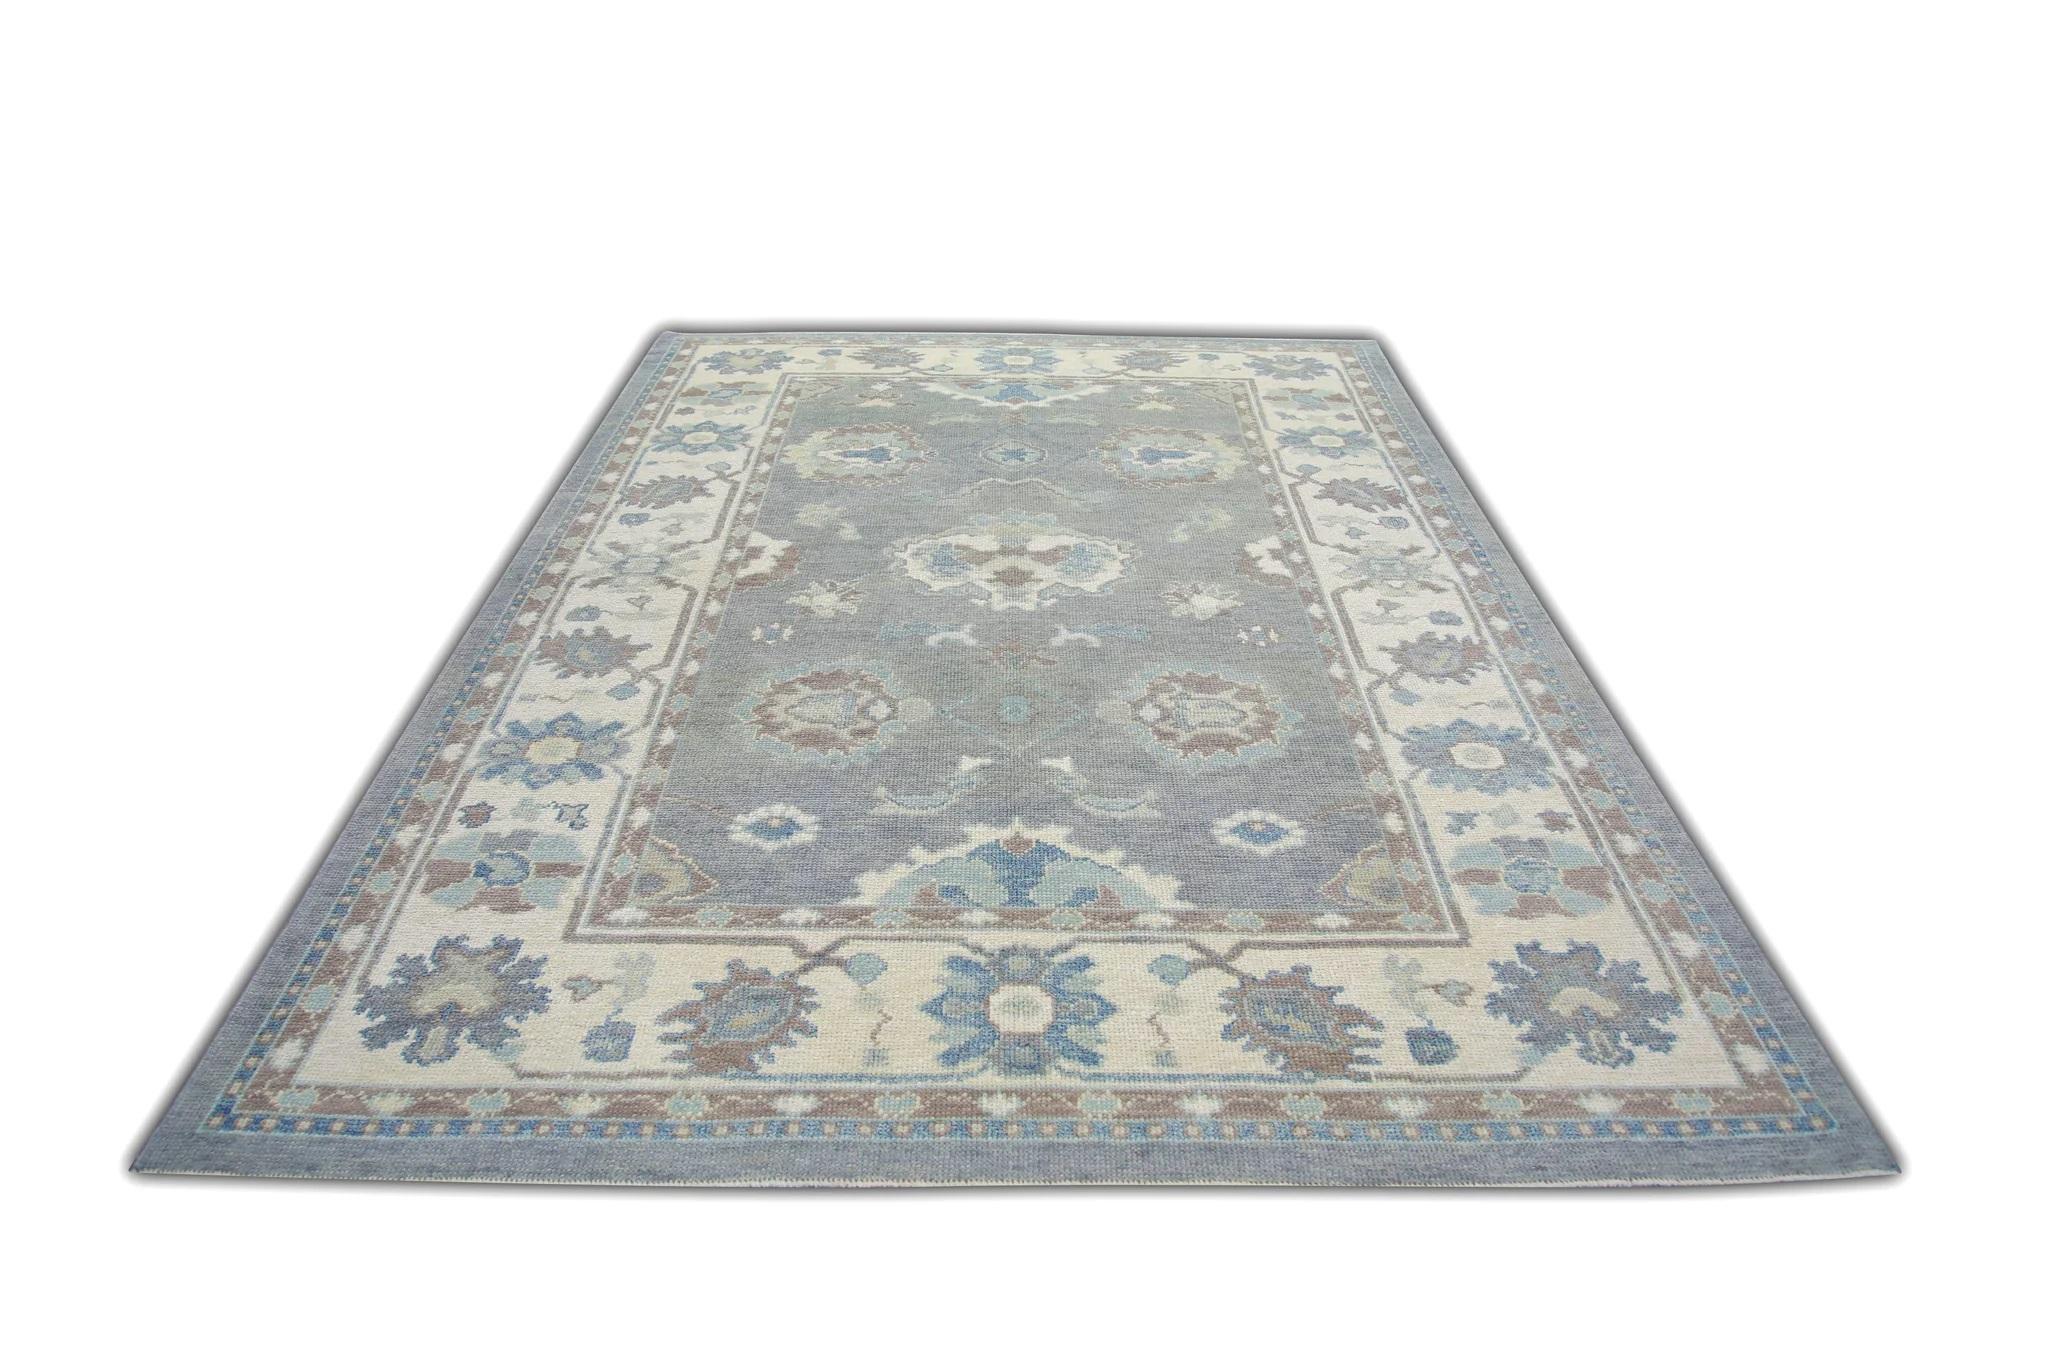 Contemporary Blue Handwoven Wool Turkish Oushak Rug in Mauve Floral Design 6'6